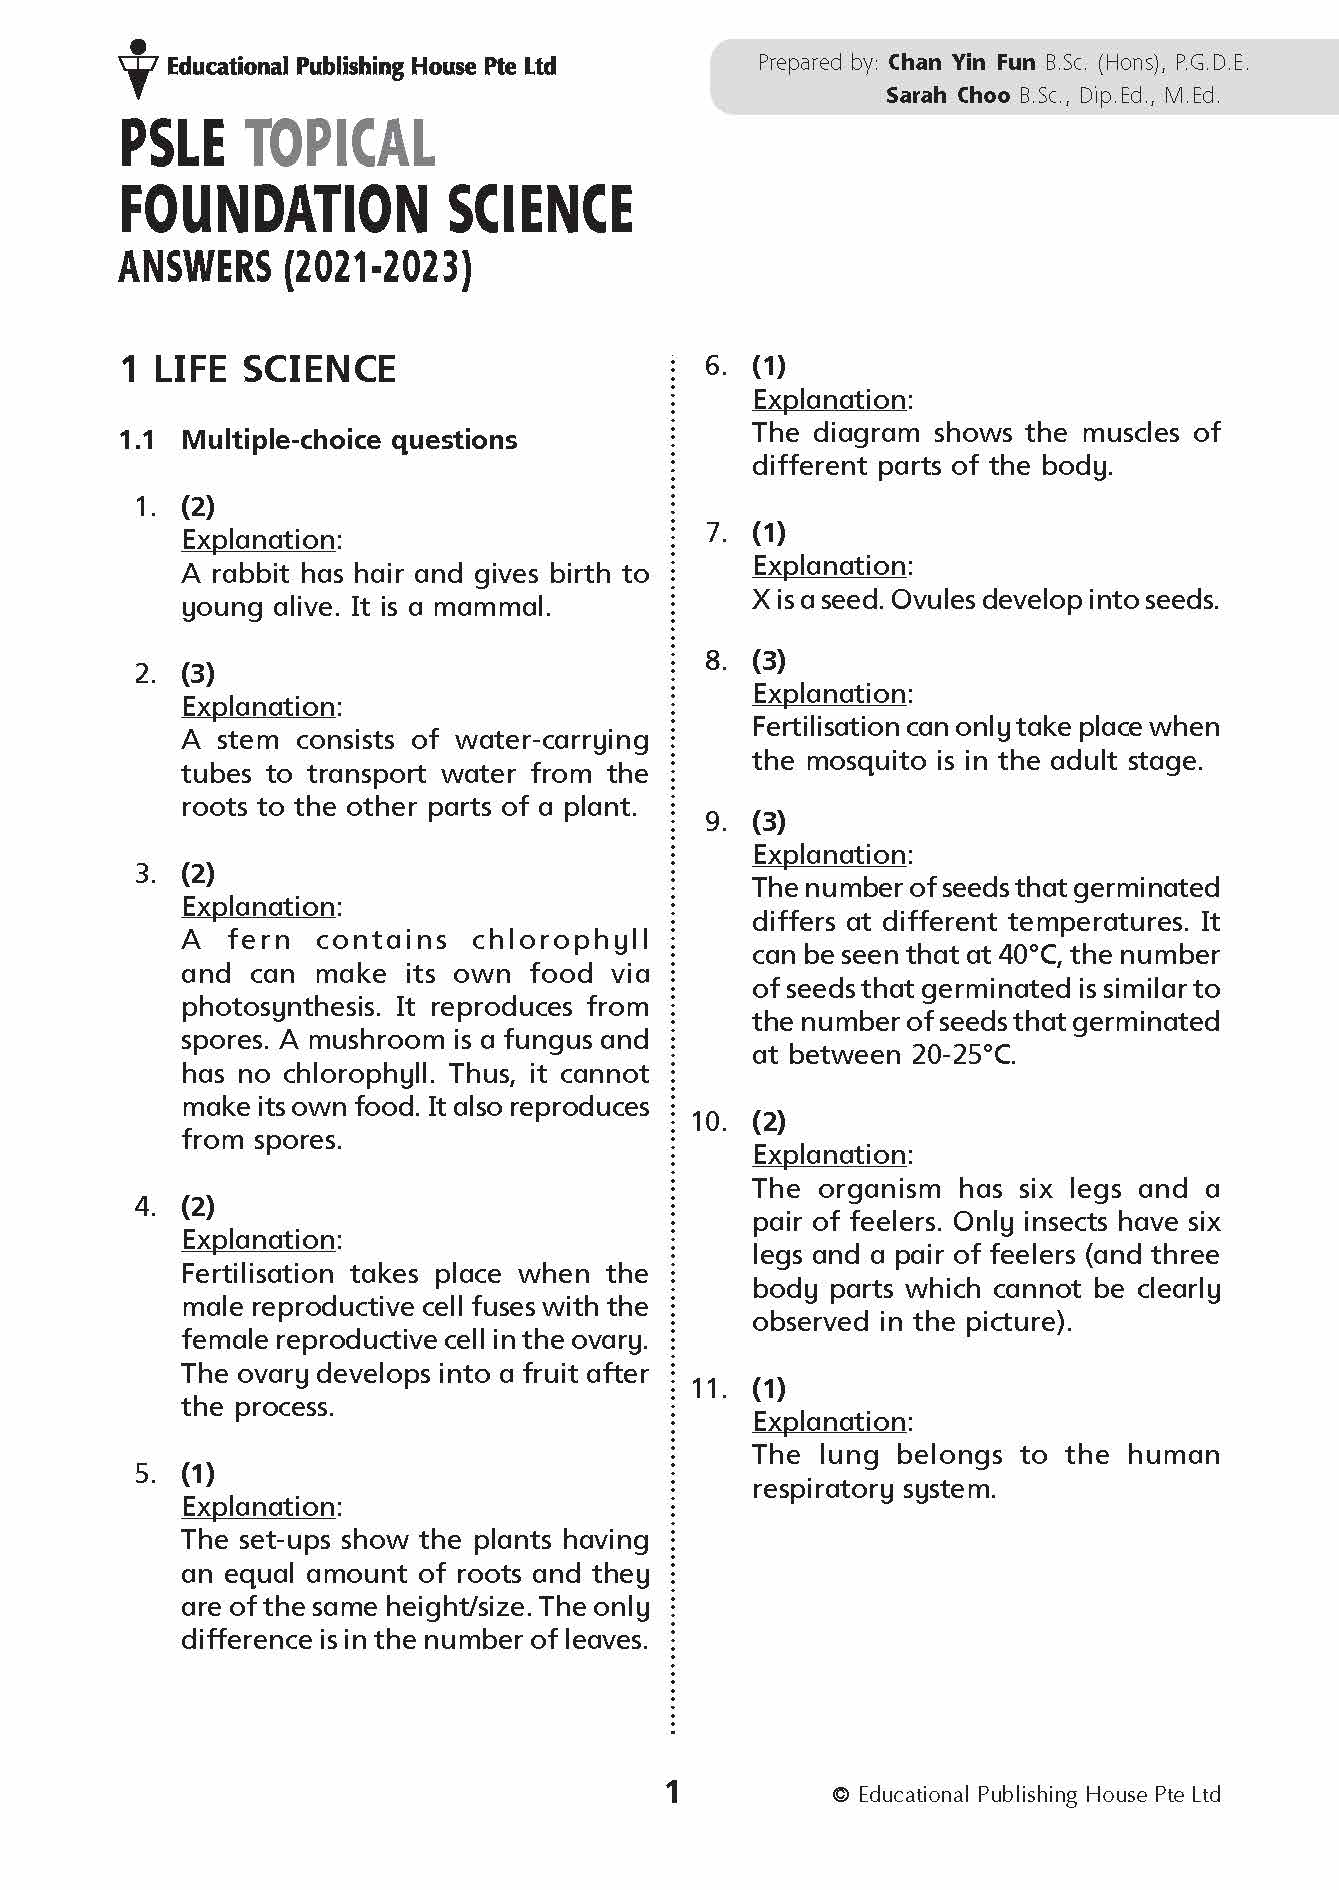 PSLE Foundation Science Exam Q&A 21-23 (Topic)